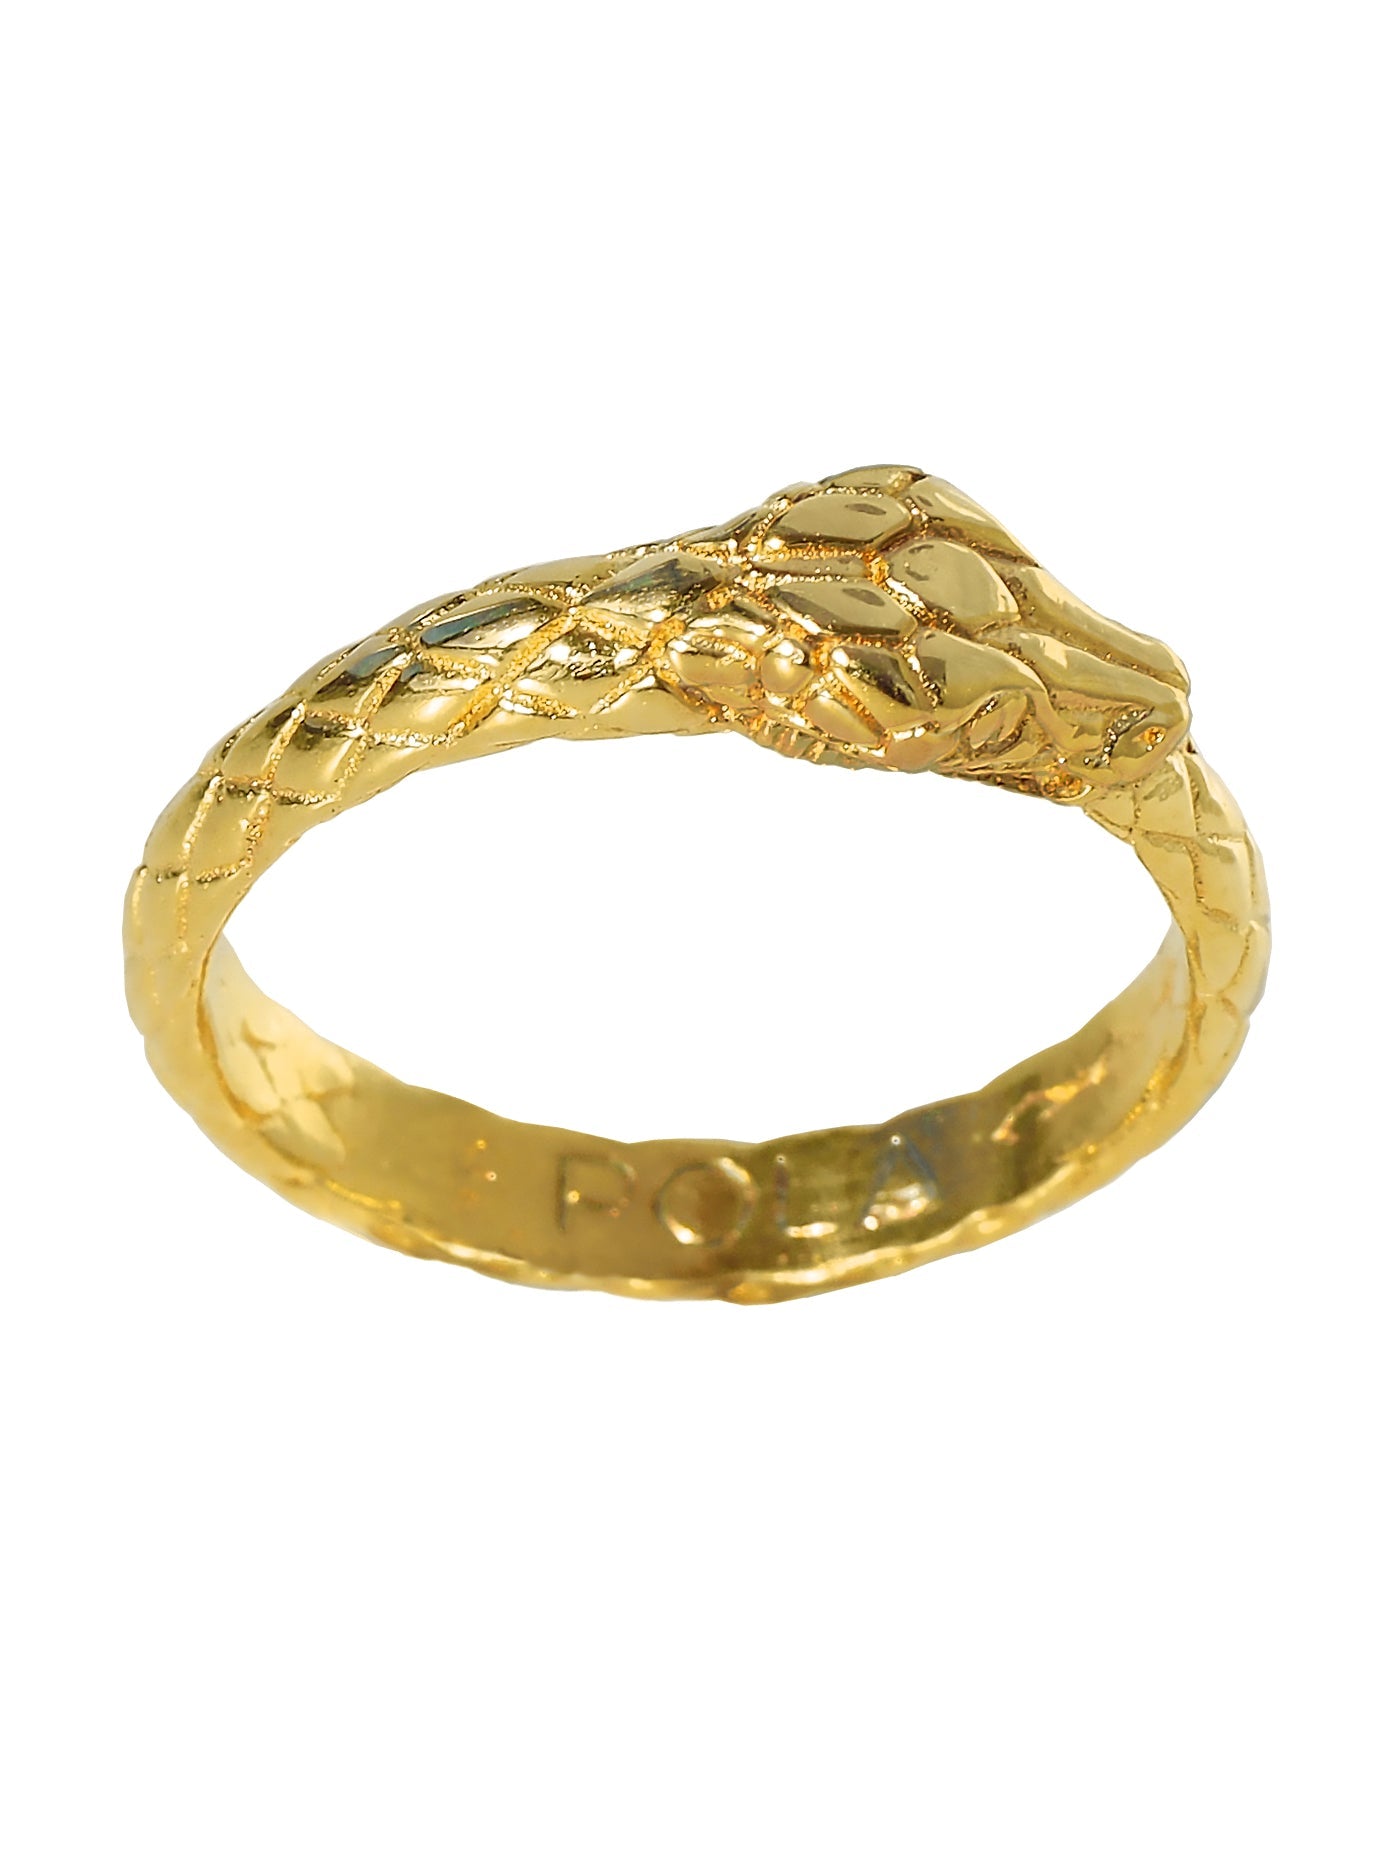 Ouroboros Ring. Gold Plated. Gender Neutral